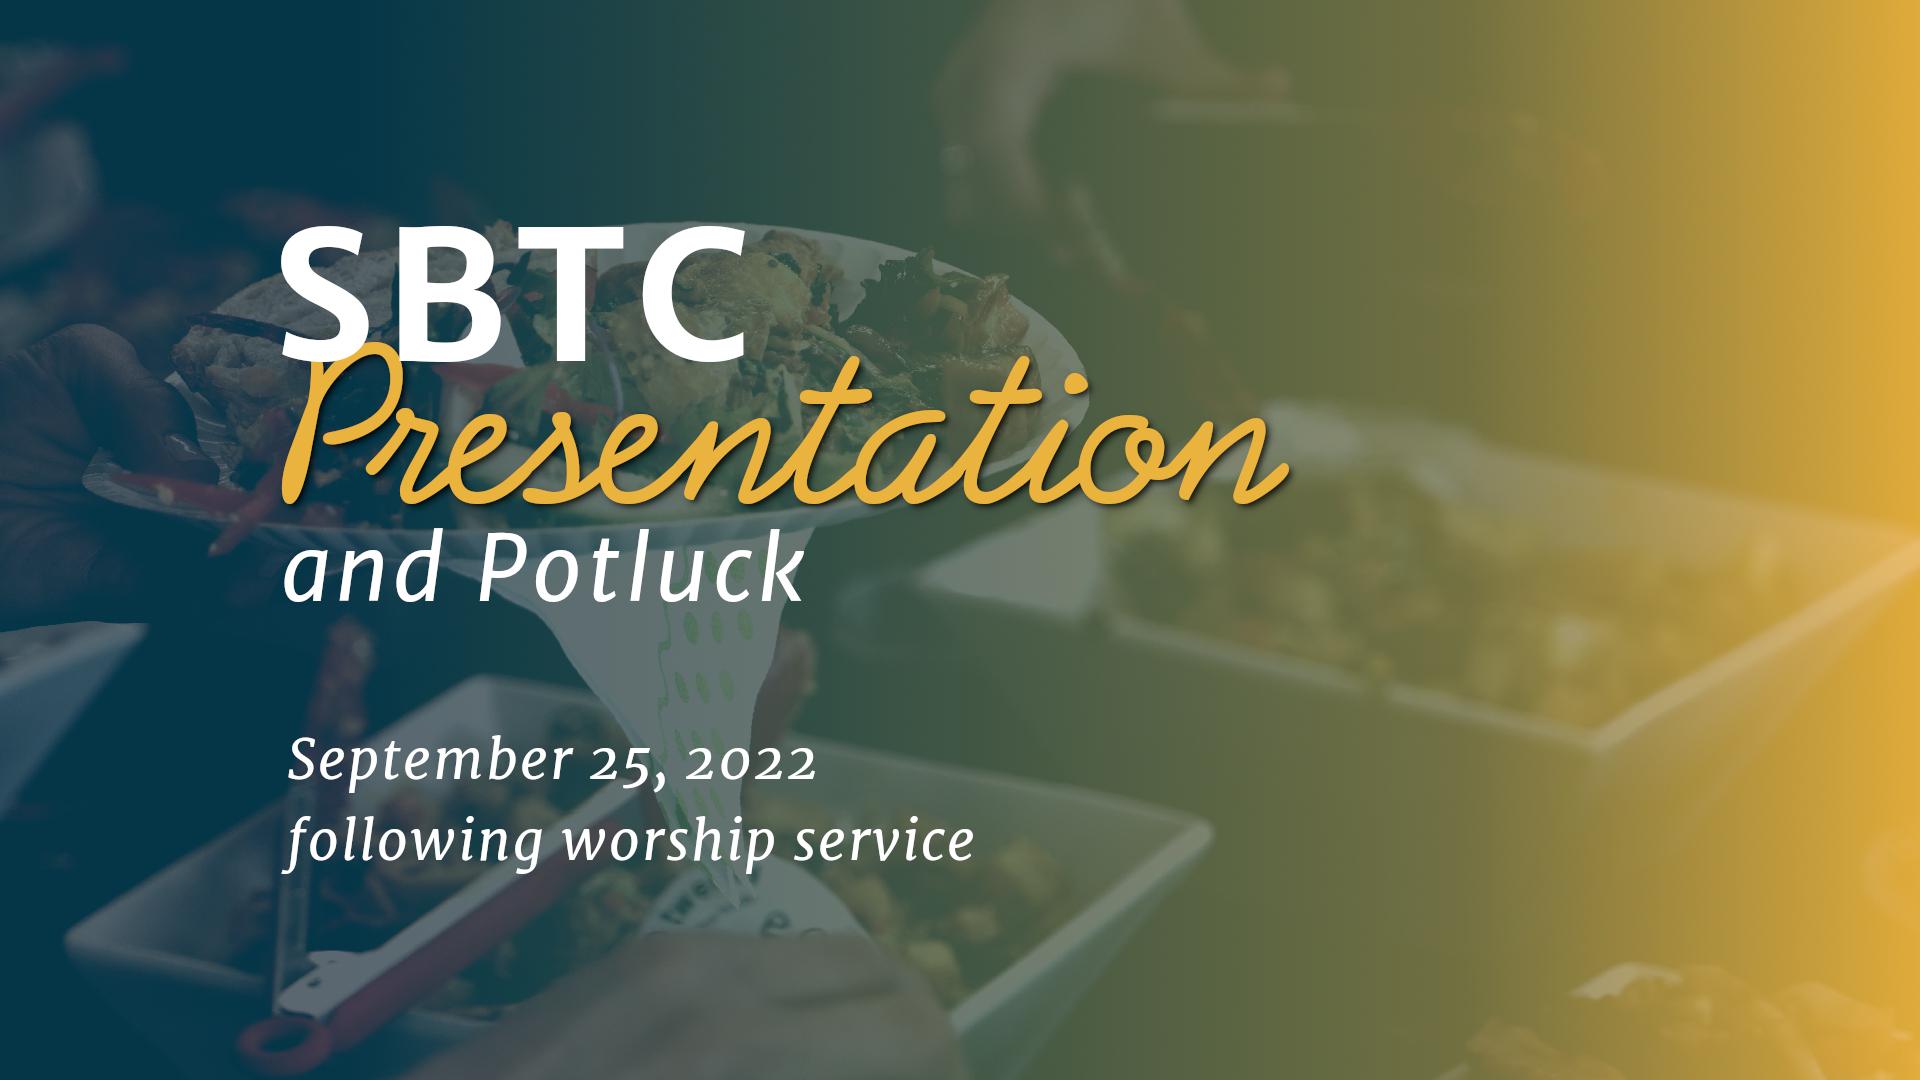 Southern Baptists of Texas (SBTC) presentation and potluck lunch